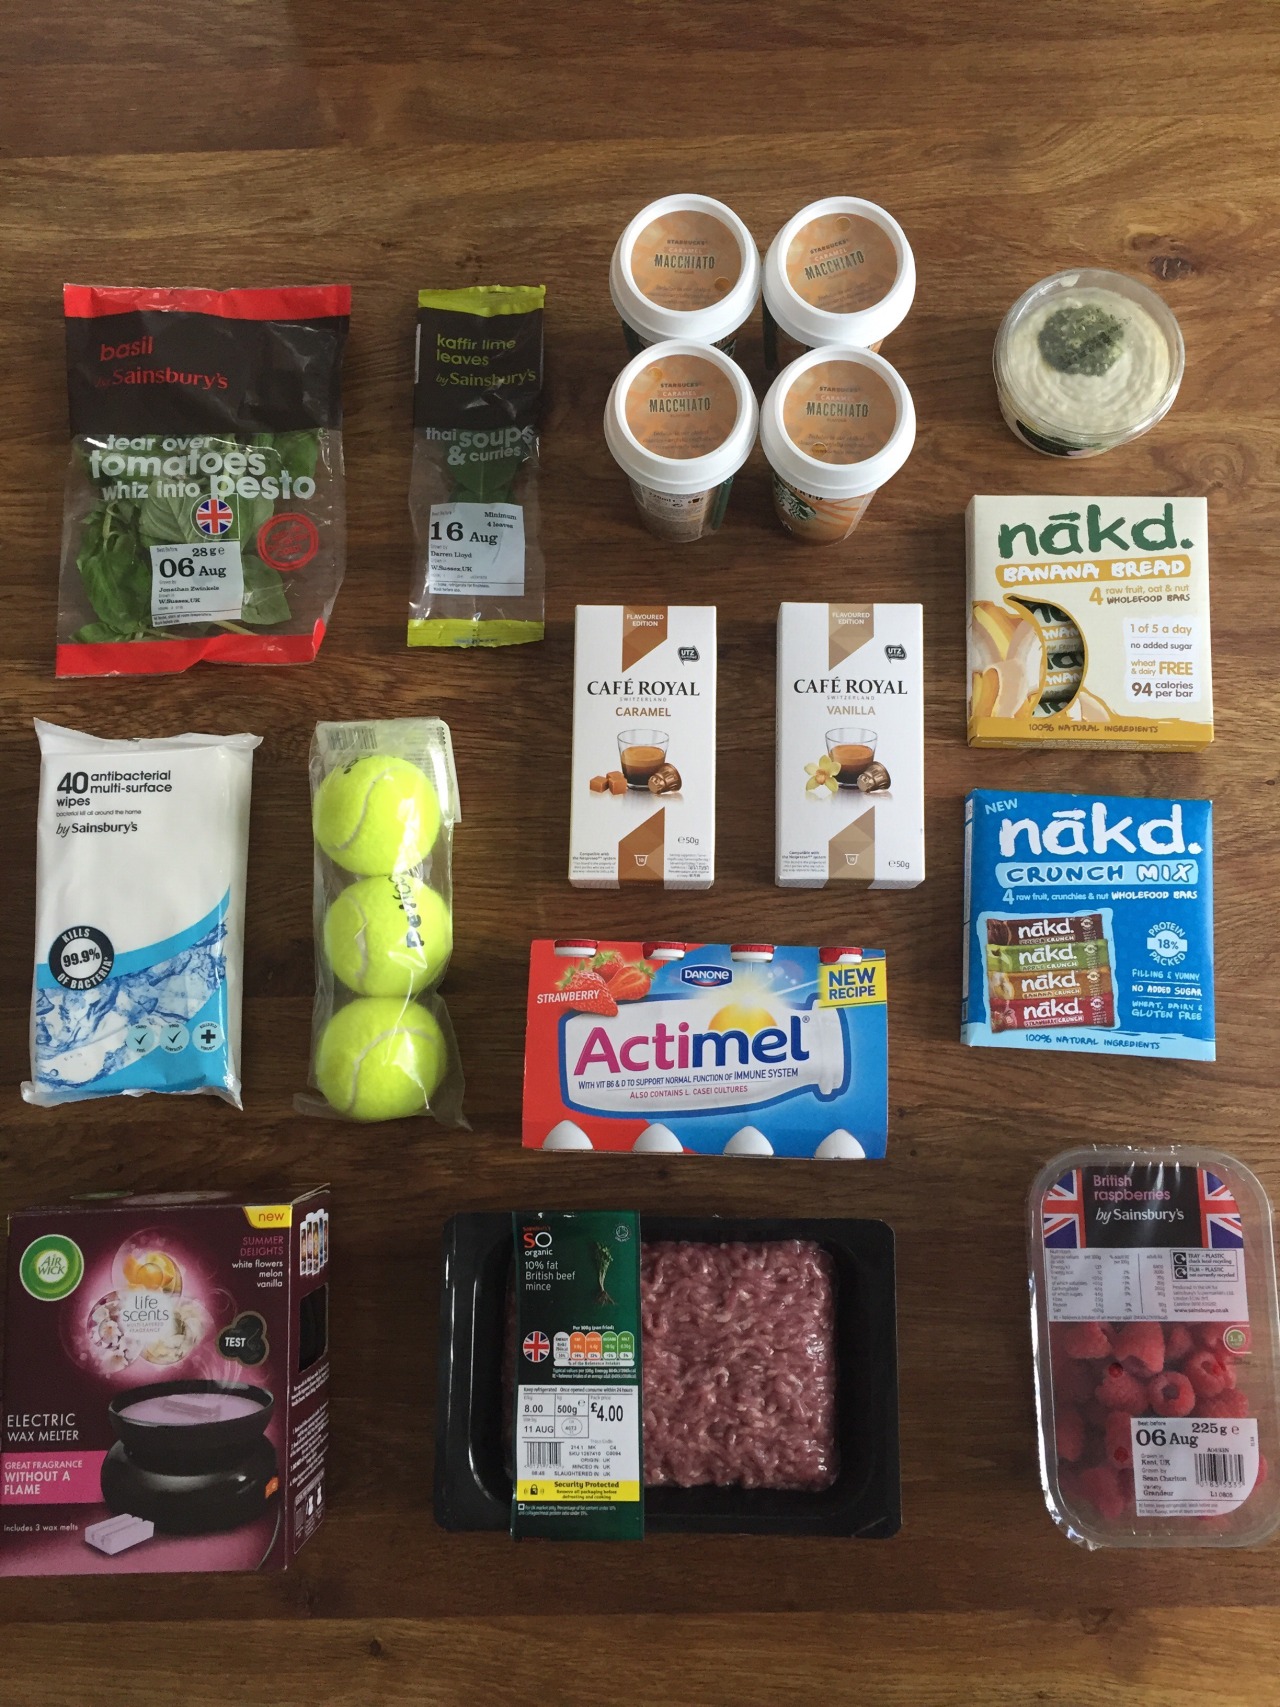 liftingunicorn:
“oops I did it again. another grocery haul.
my favs are the balls for my dog and the wax melter (because now I can lift all those yankee candle melts).
”